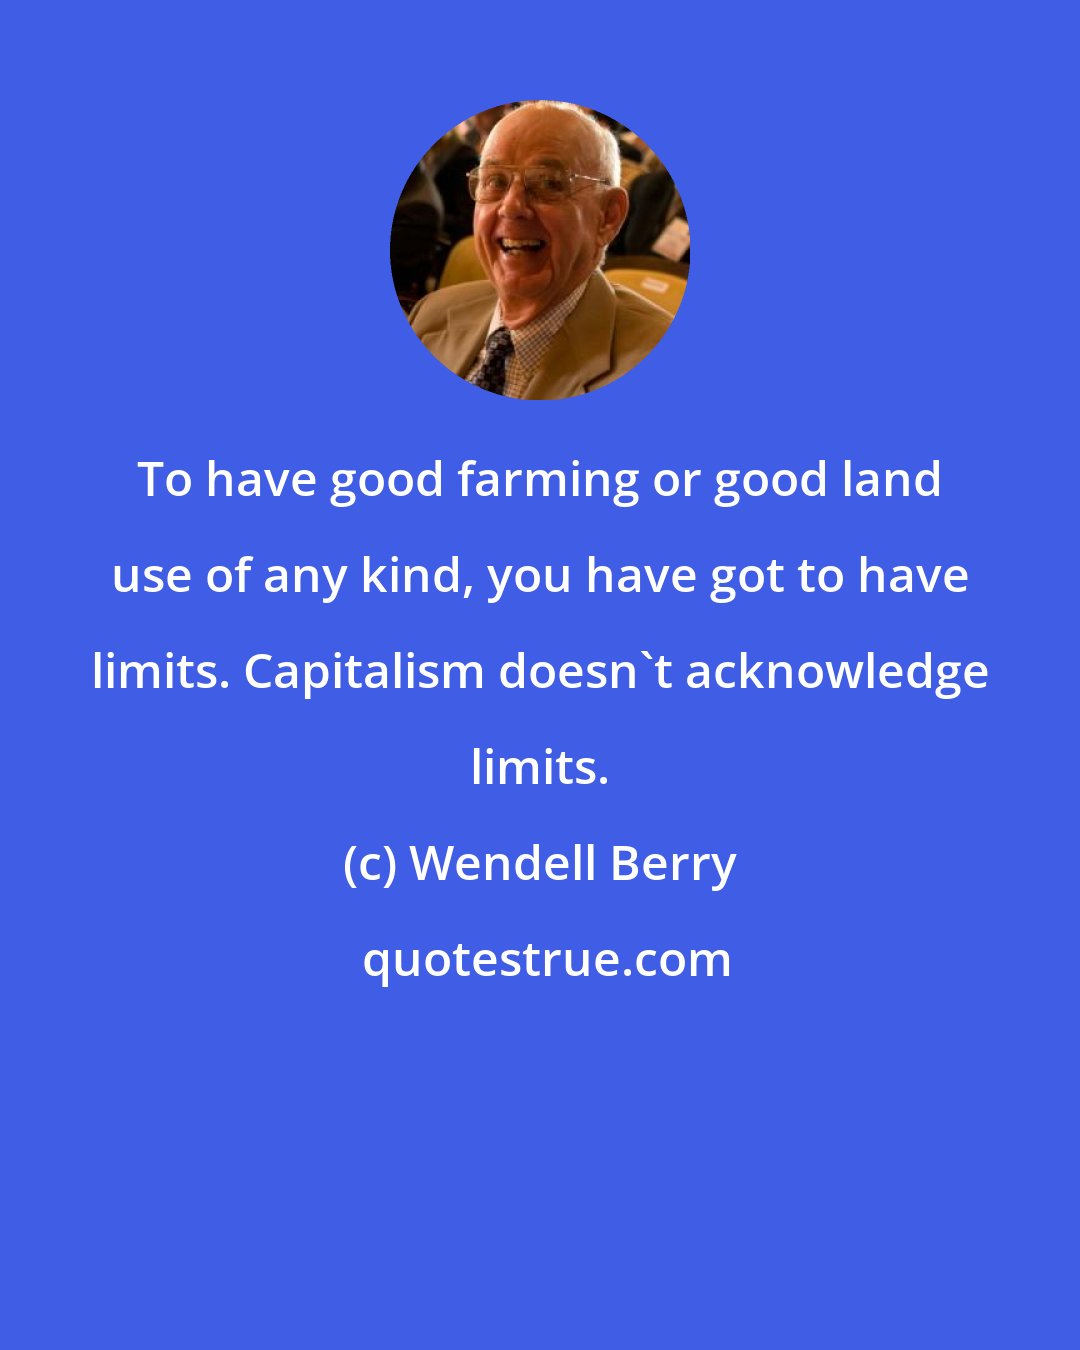 Wendell Berry: To have good farming or good land use of any kind, you have got to have limits. Capitalism doesn't acknowledge limits.